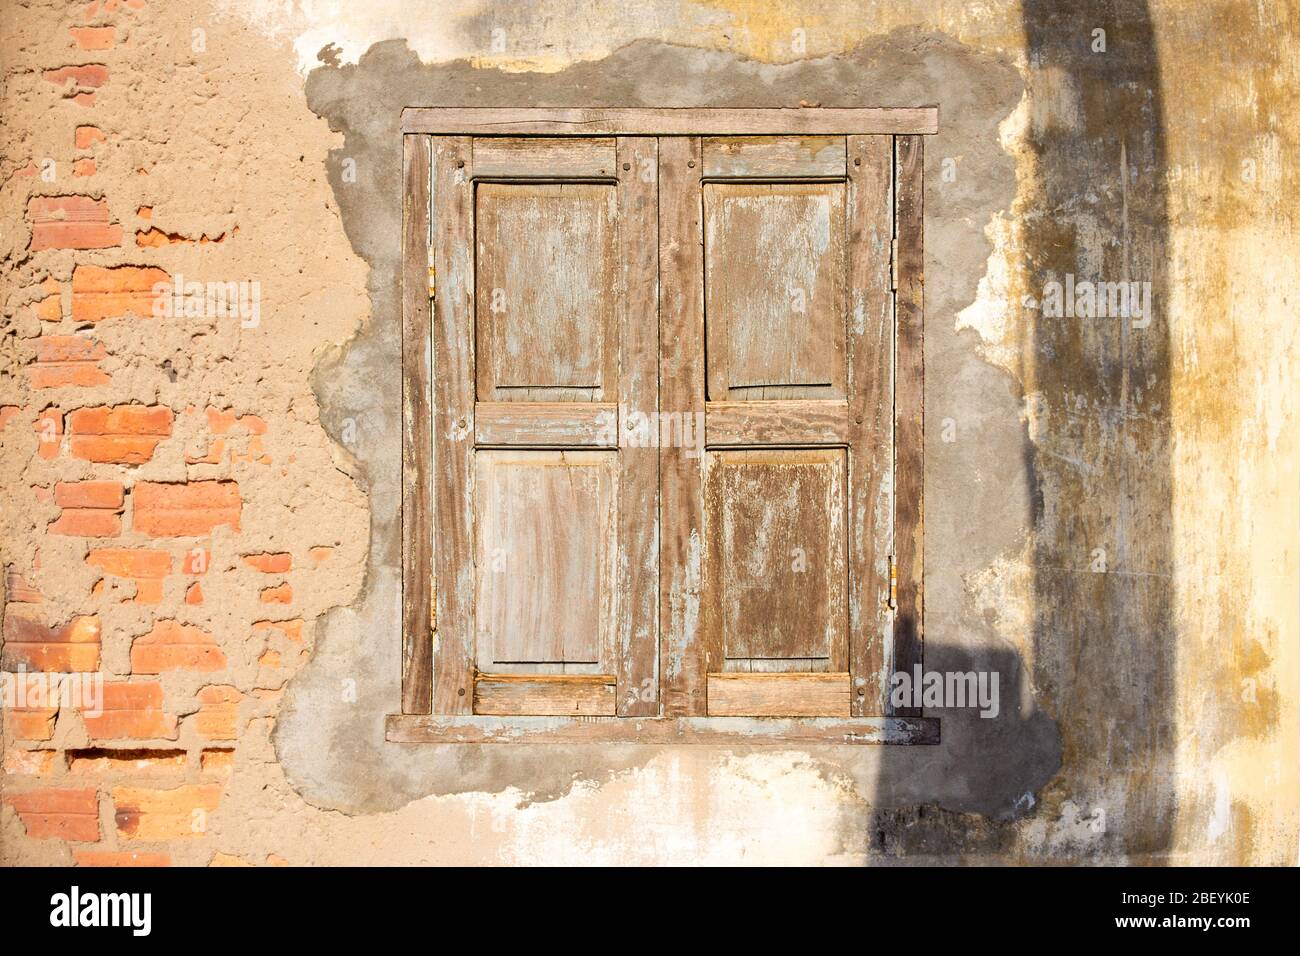 A closed weathered wooden shutter window. Stock Photo